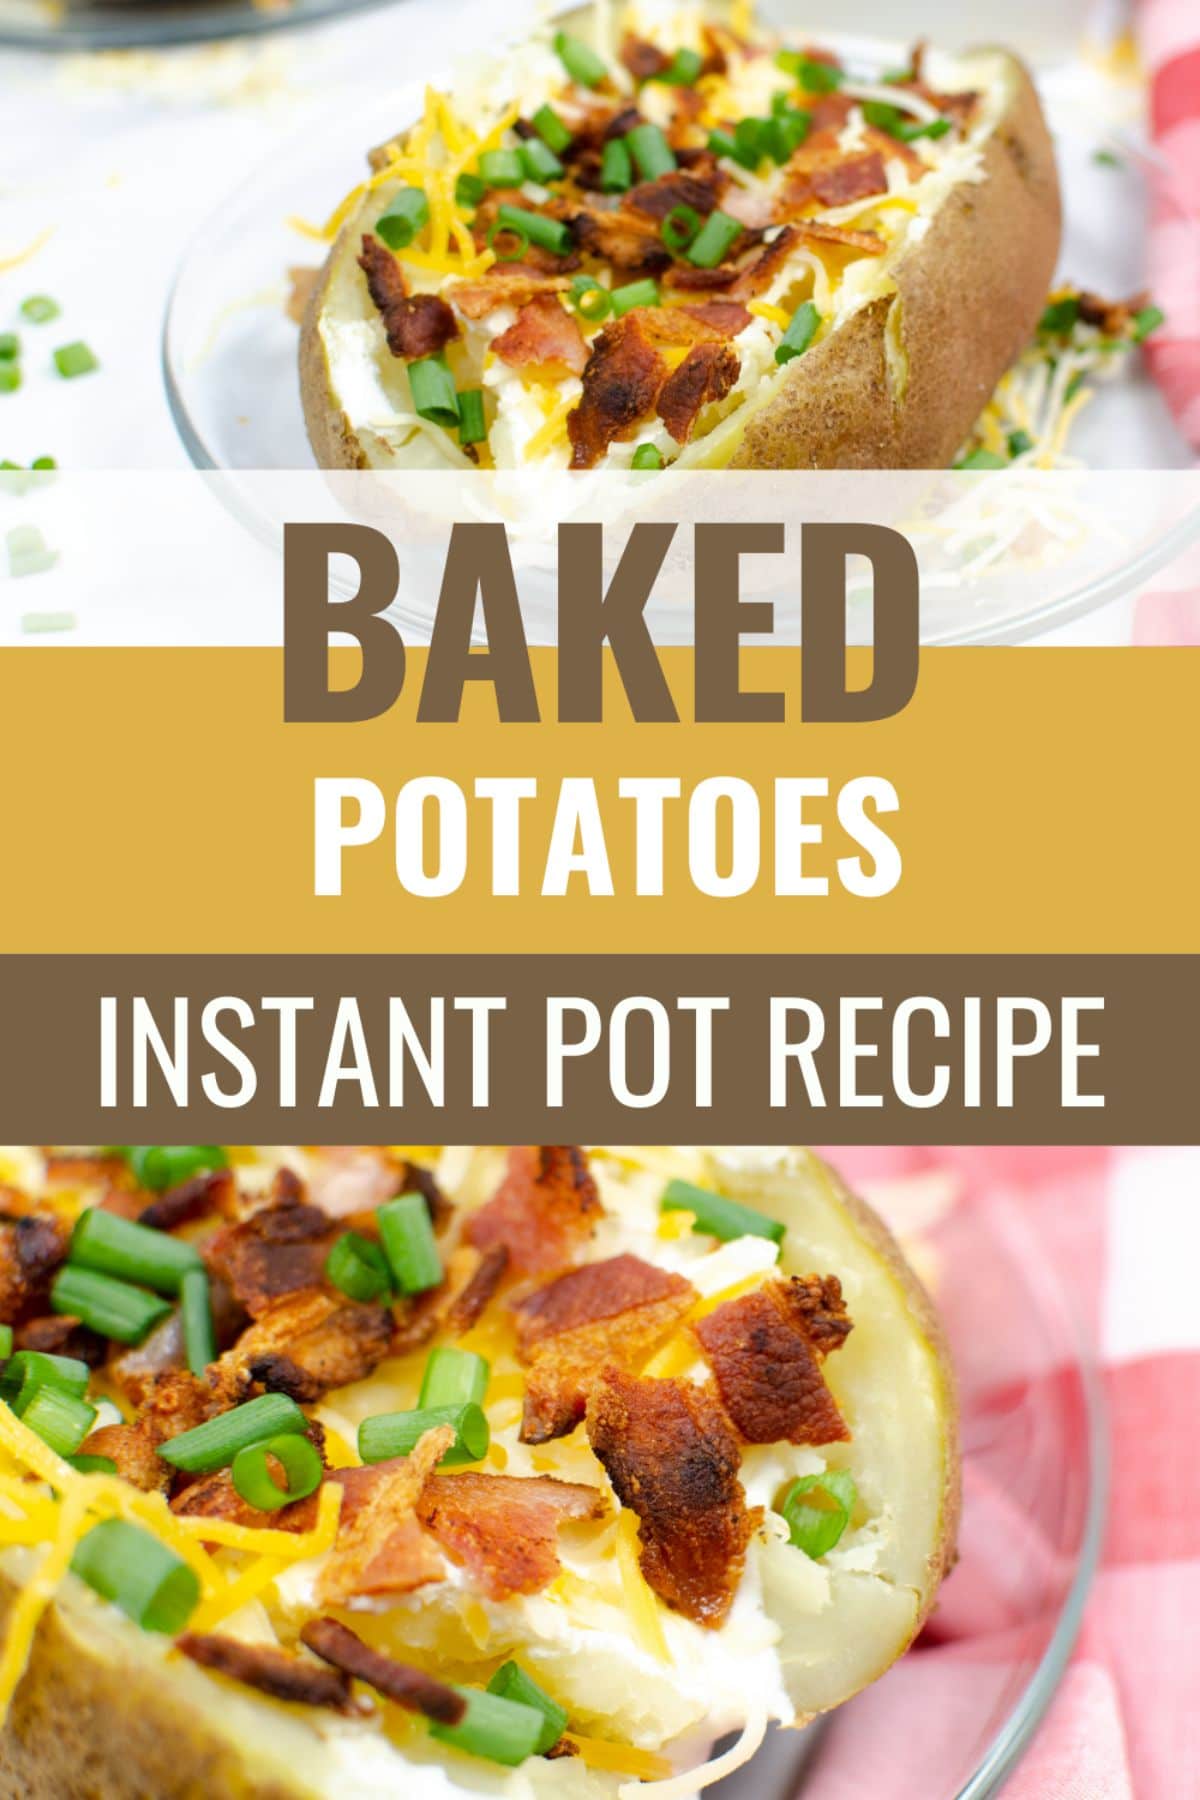 Instant Pot Baked Potatoes are an easy side dish that are perfect for any meal! These potatoes are fluffy, delicious, and simple to make. #instantpot #pressurecooker #bakedpotato #recipe via @wondermomwannab